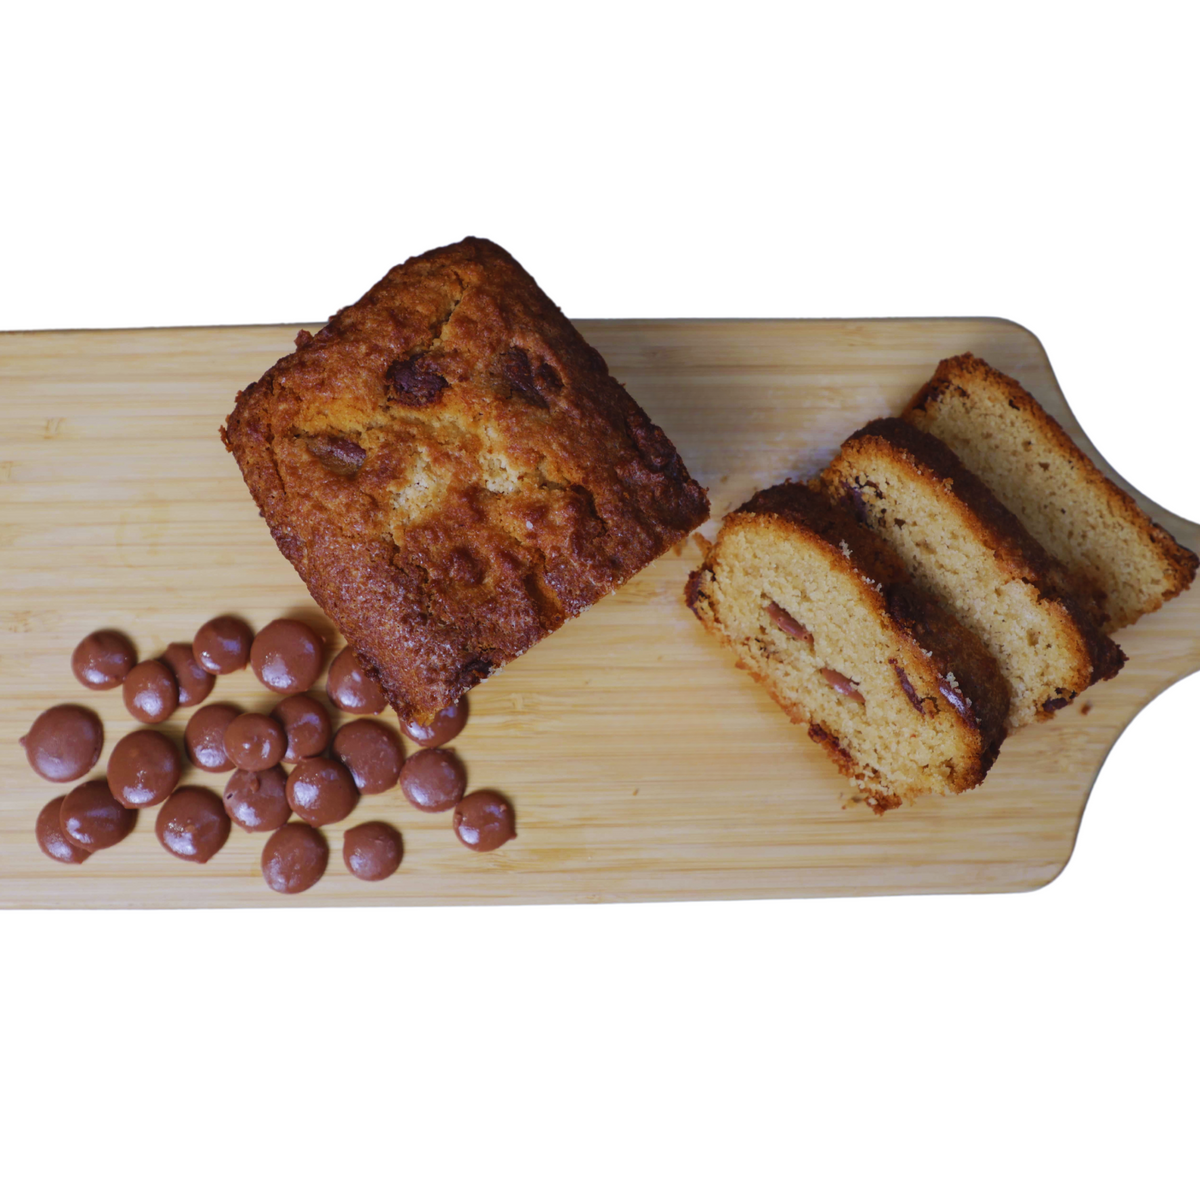 A wooden cutting board, perfect for chopping No Guilt Bakes Chocolate Chip Loaf or low-carb Keto recipes.